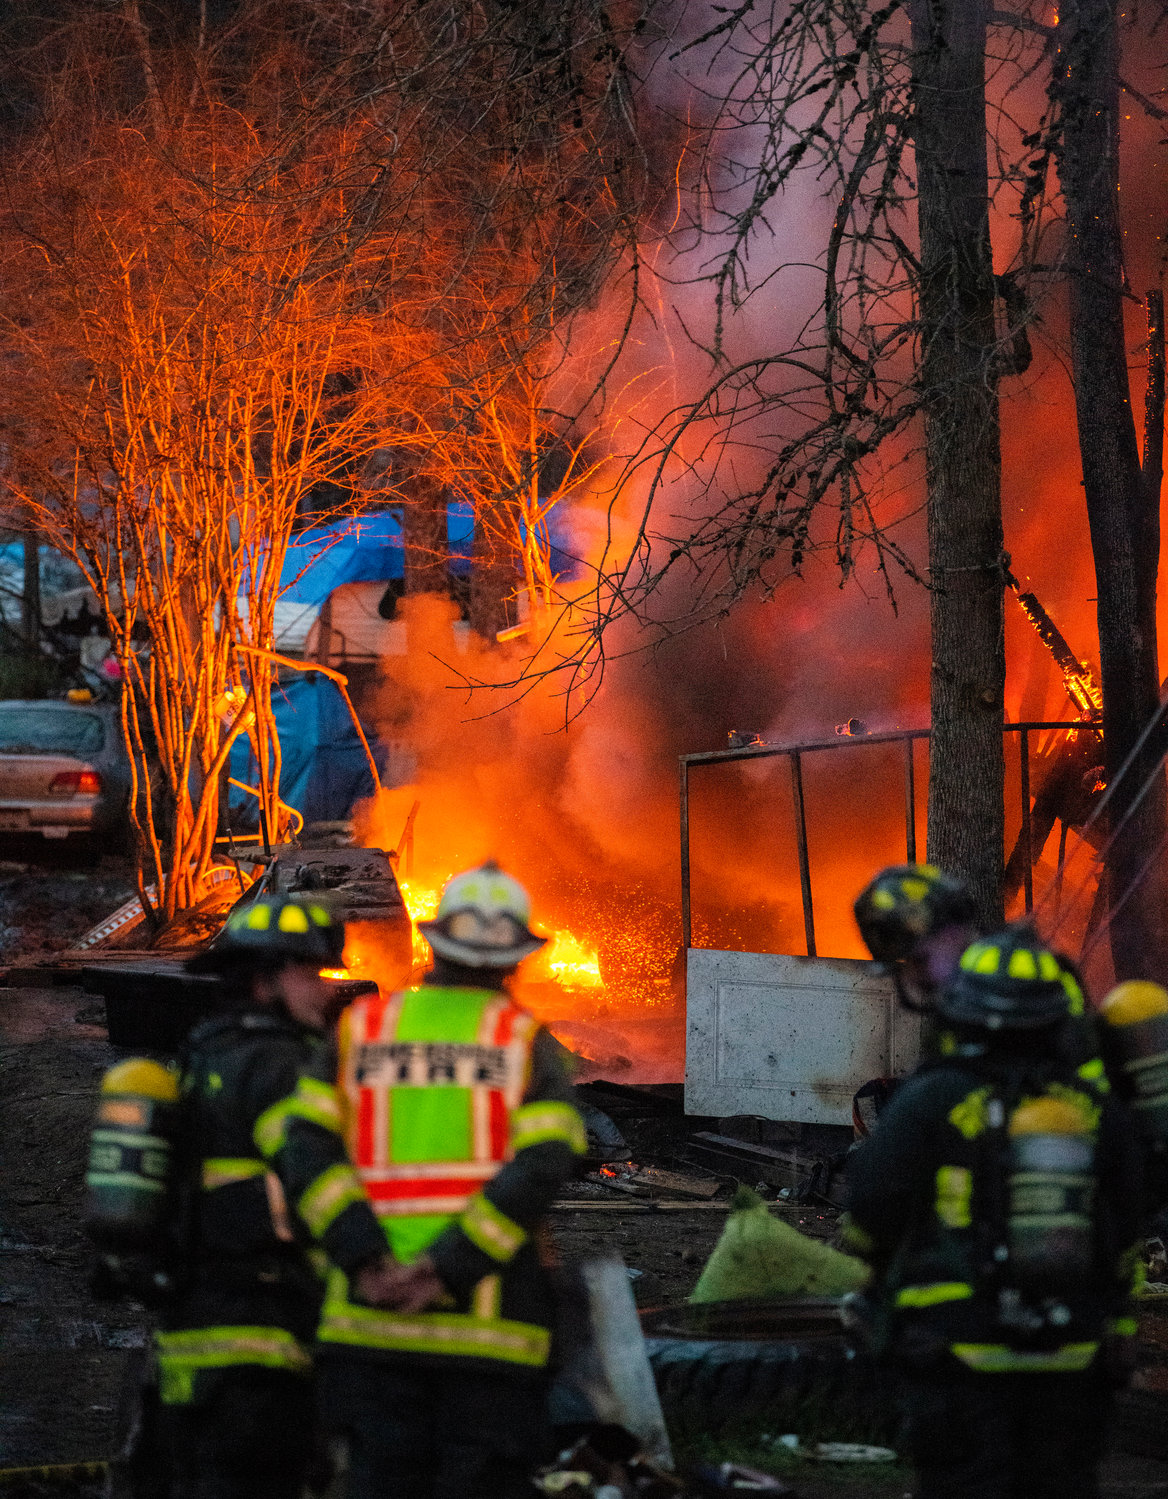 Riverside Fire Authority, Centralia Police and Chehalis Fire respond to a scene at the end of Eckerson Road in Centralia as a propane tank shoots flames from a structure inside a homeless encampment Tuesday, March 28, 2023.